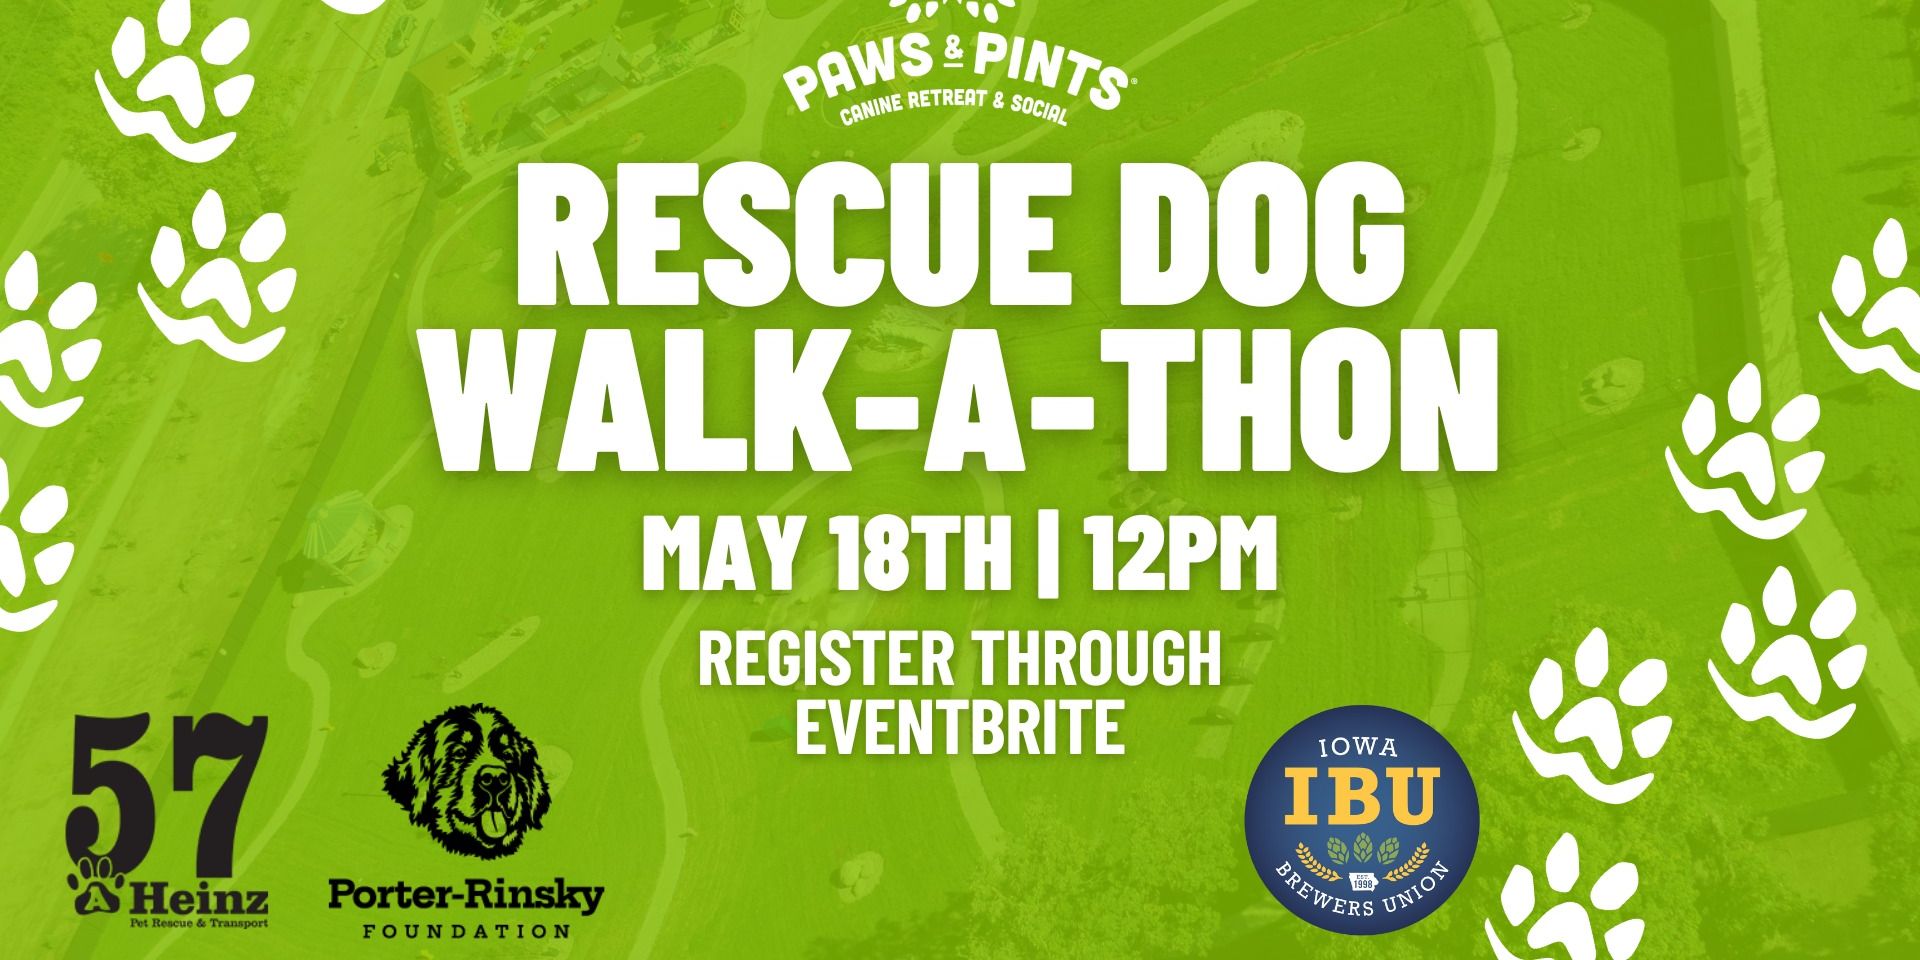 Rescue Dog Walk-A-Thon promotional image